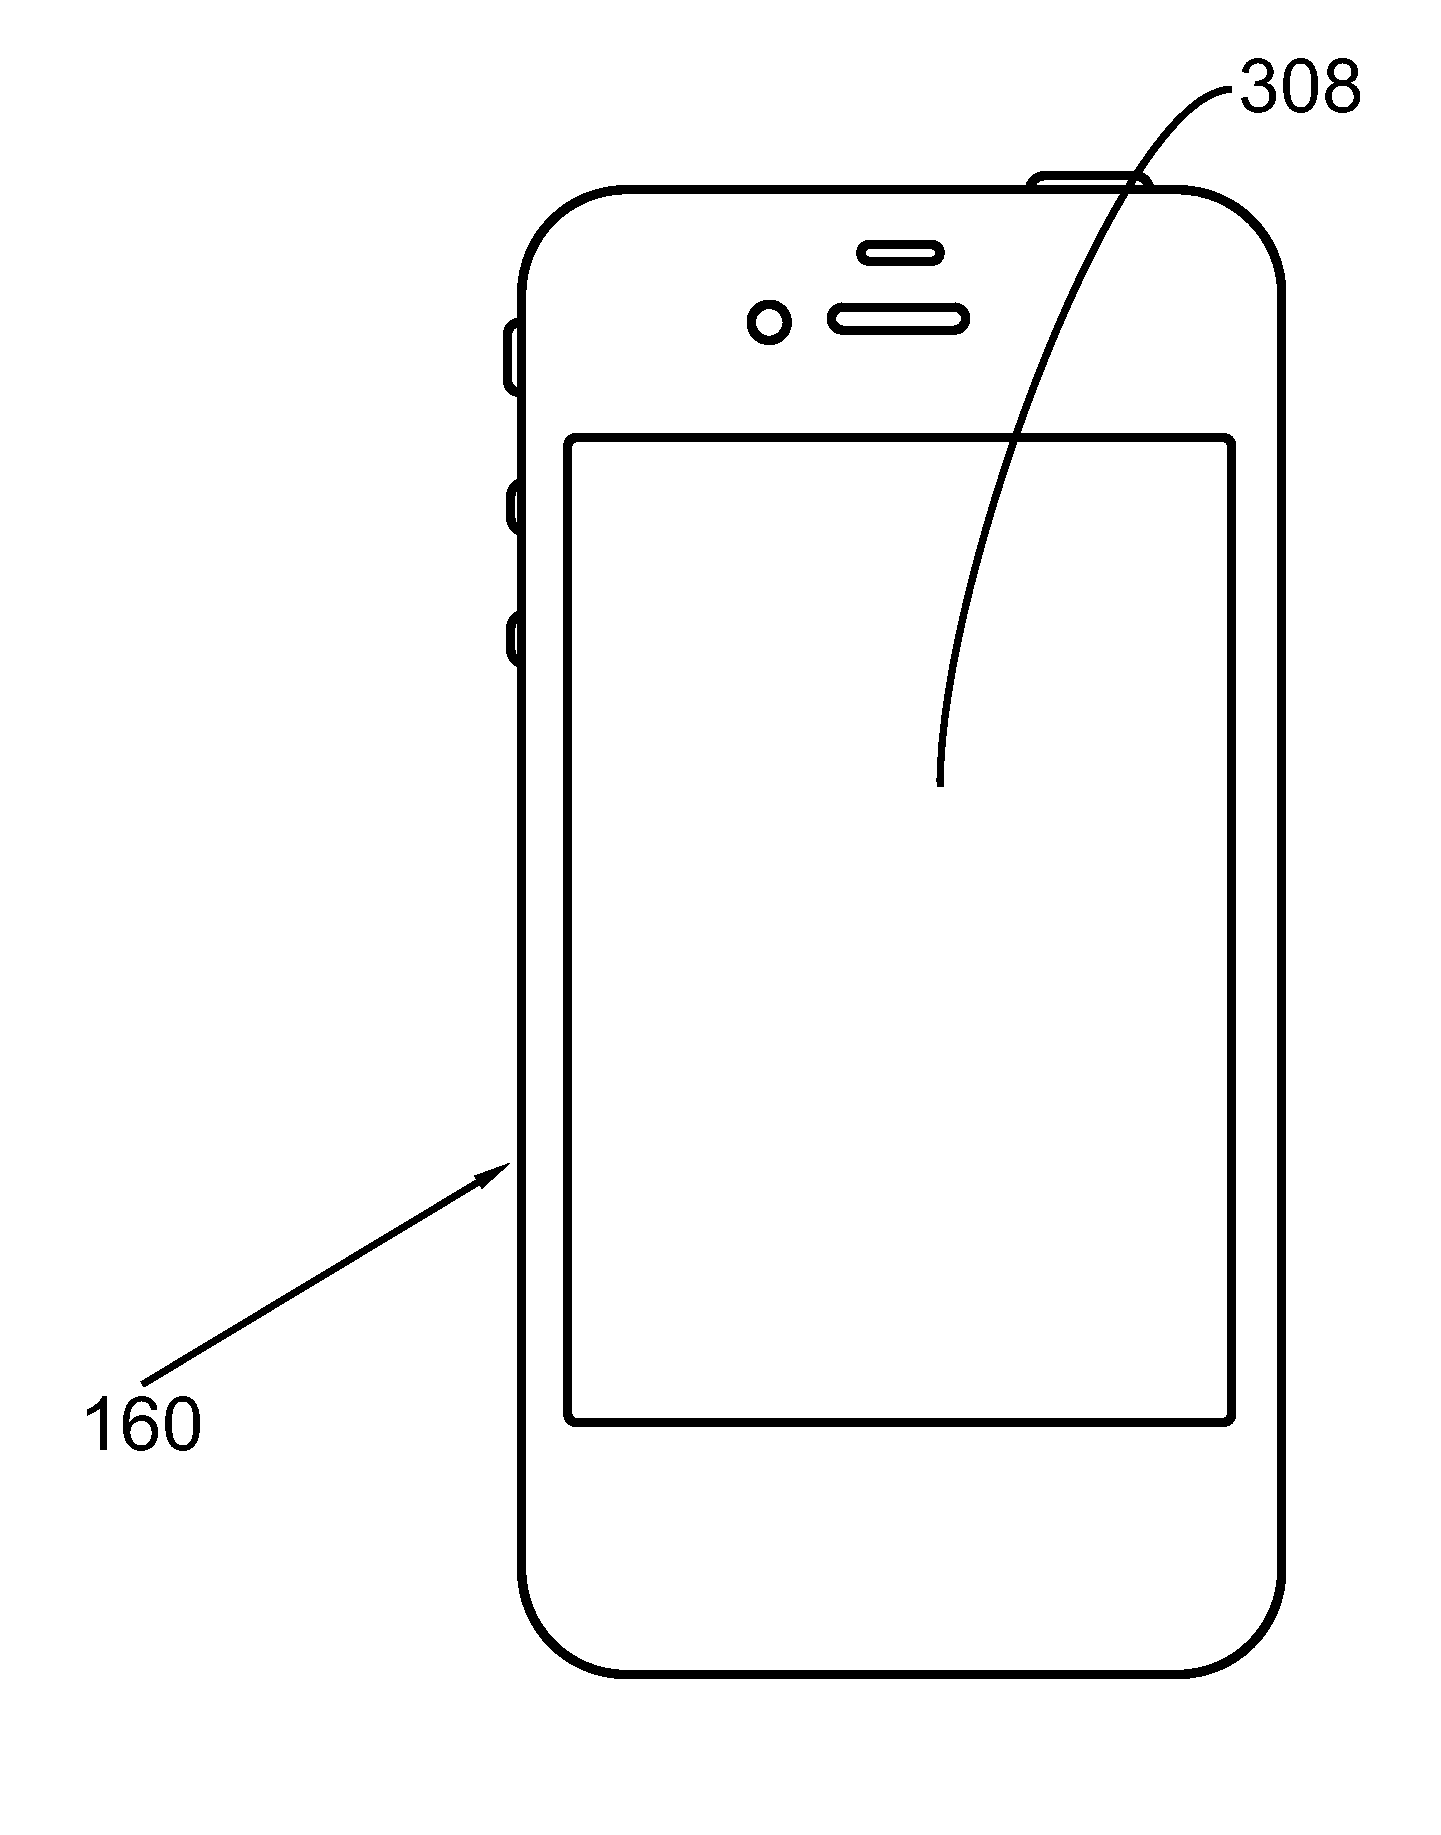 Method to provide dynamic customized sports instruction responsive to motion of a mobile device